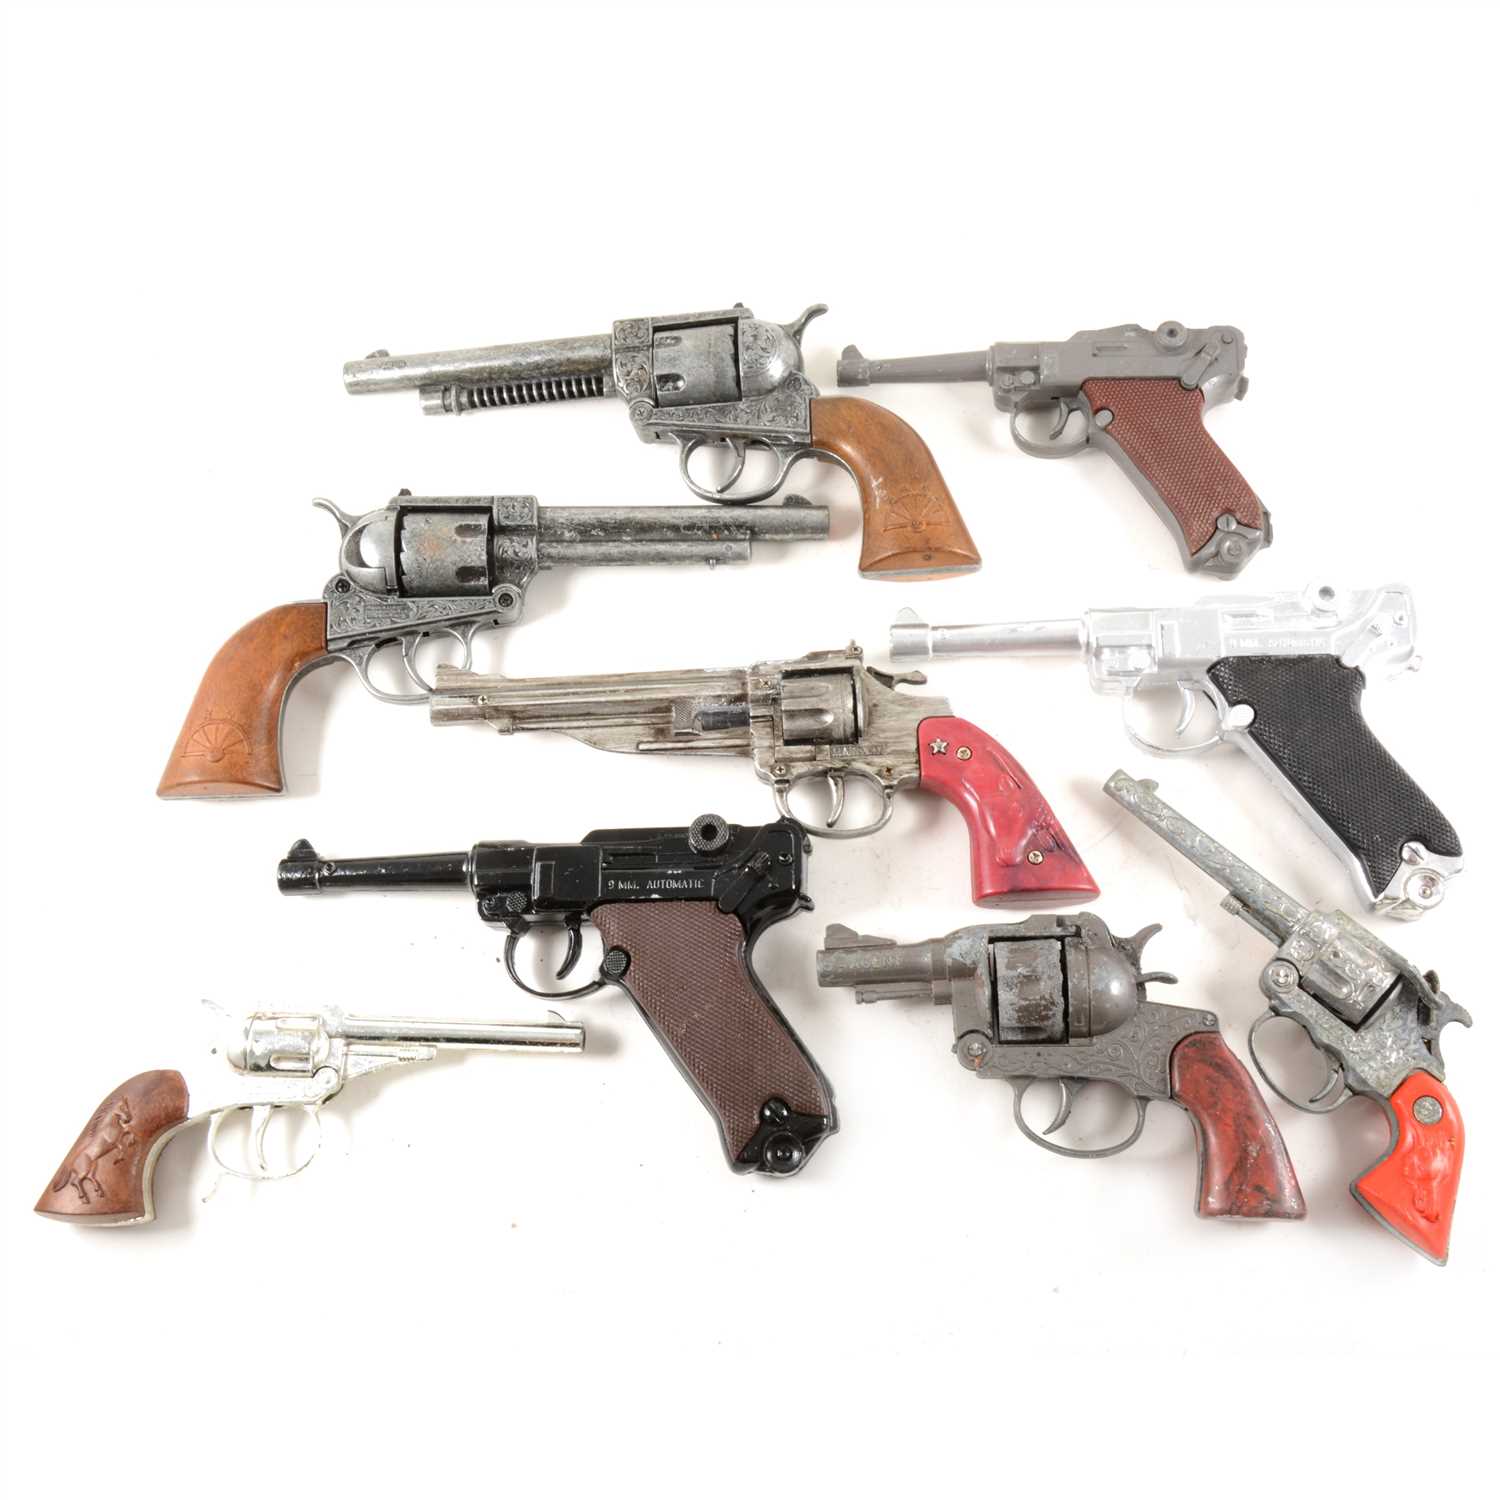 Lot 136 - Vintage toy pistol and revolver type cap guns; a selection to include examples by Lone Star, Edison Giocattoli, and others, nine in total.